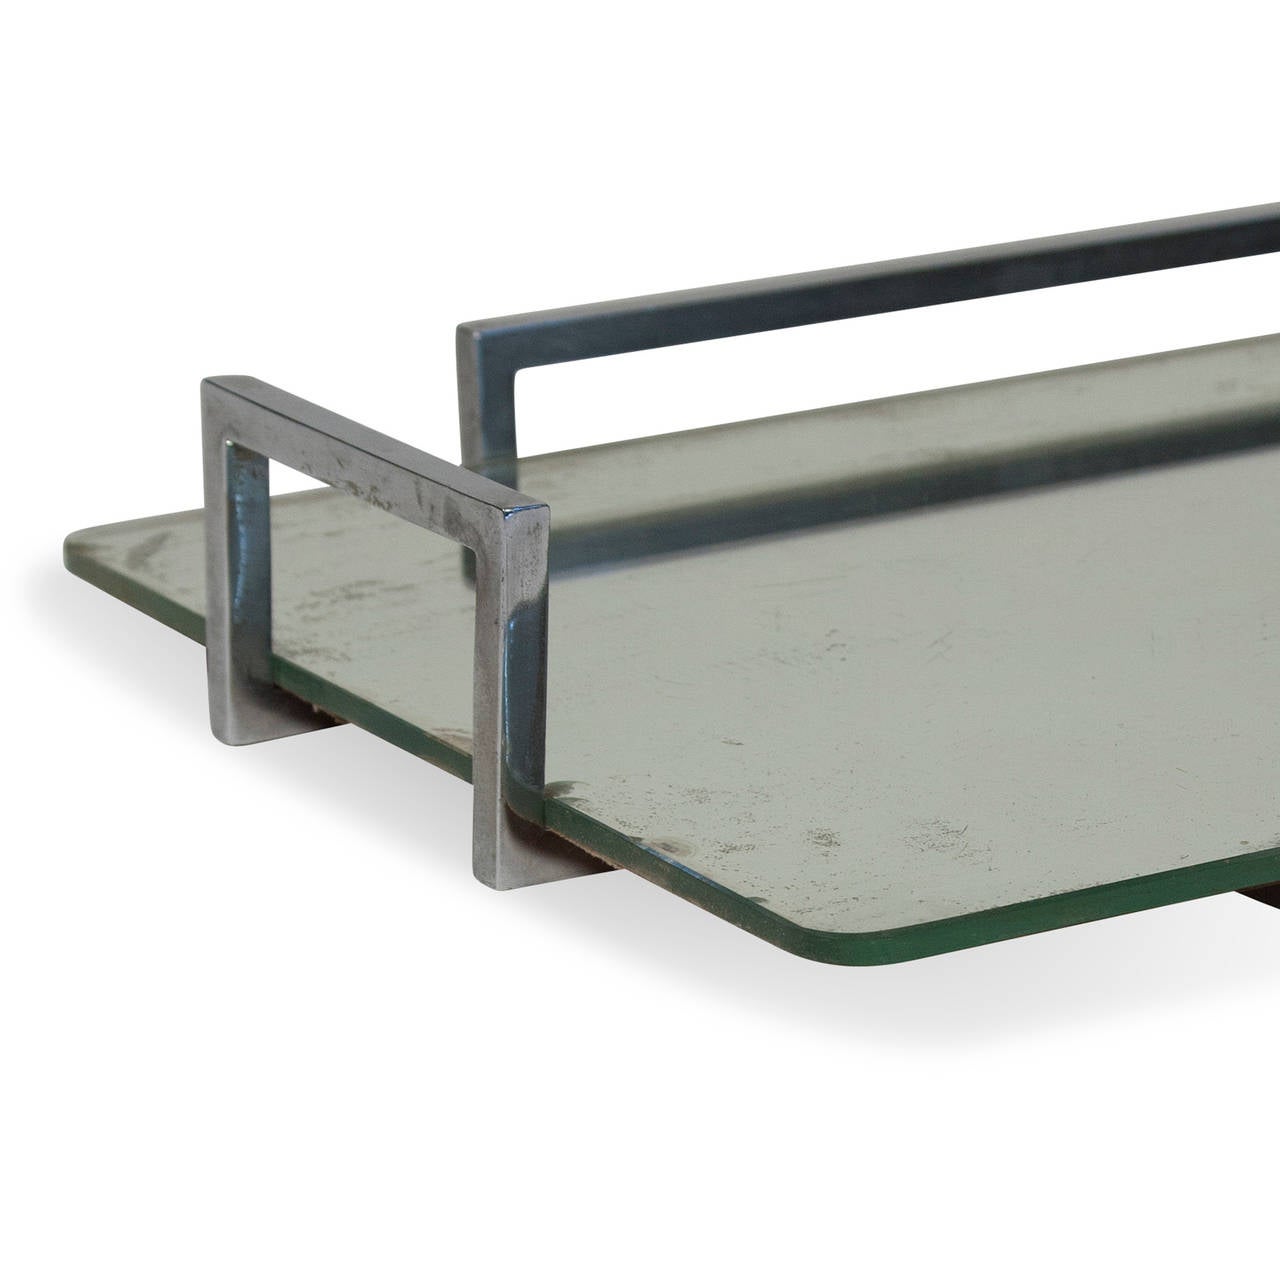 1930s Modernist Nickel Serving Tray In Good Condition For Sale In Brooklyn, NY